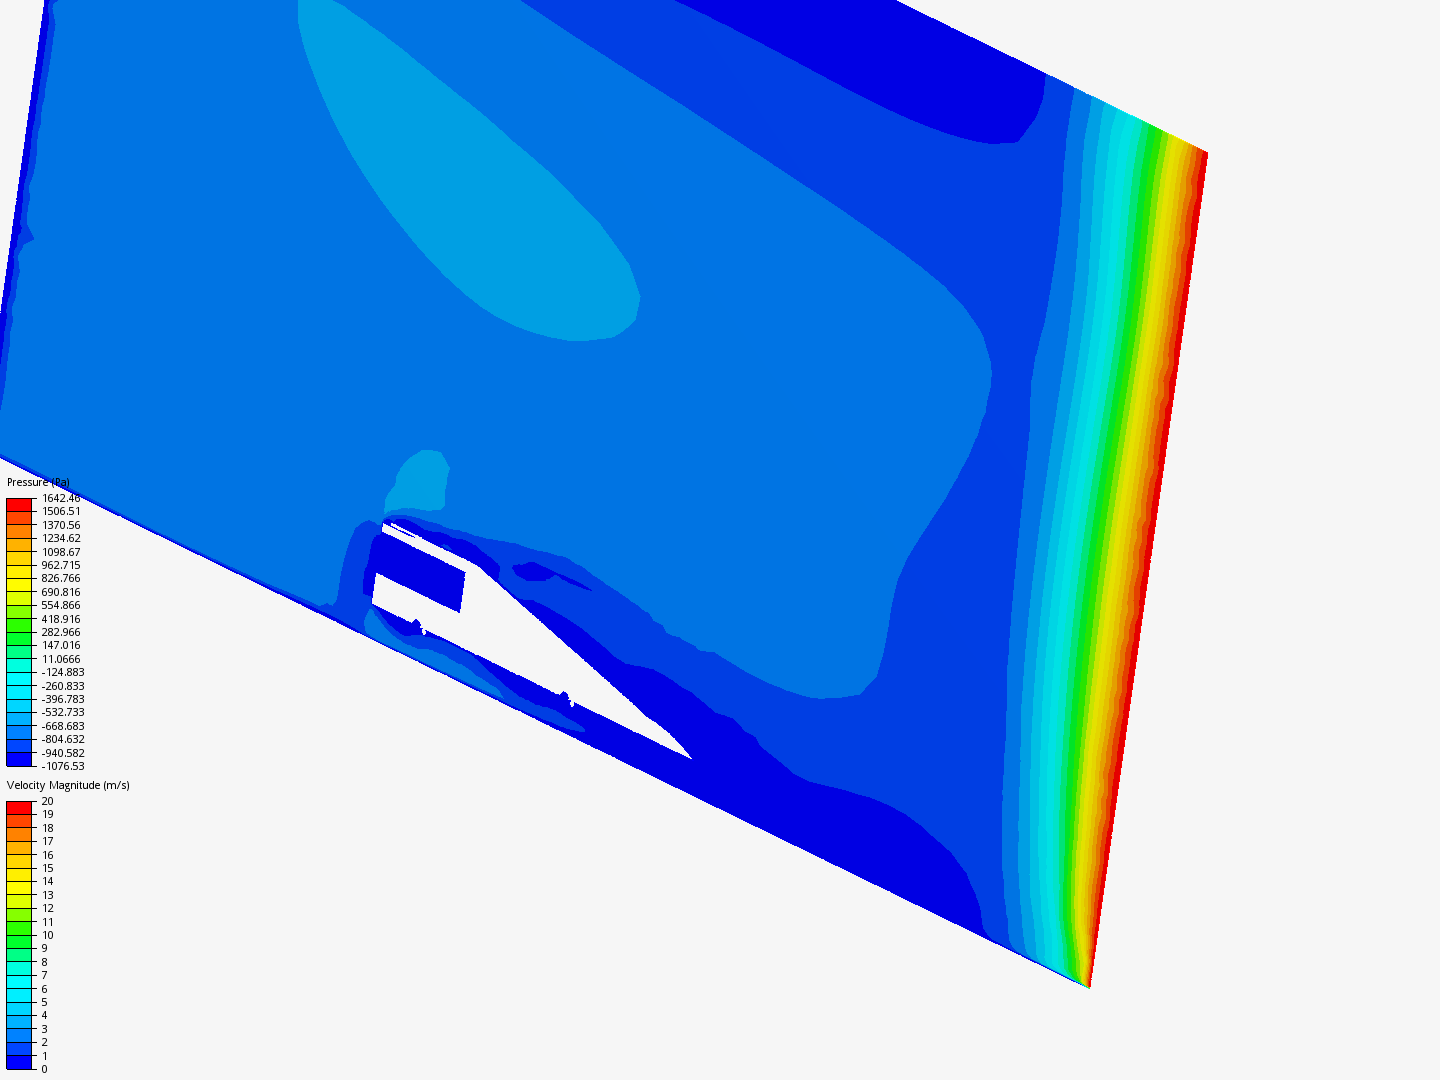 Car cfd attempt 3 image